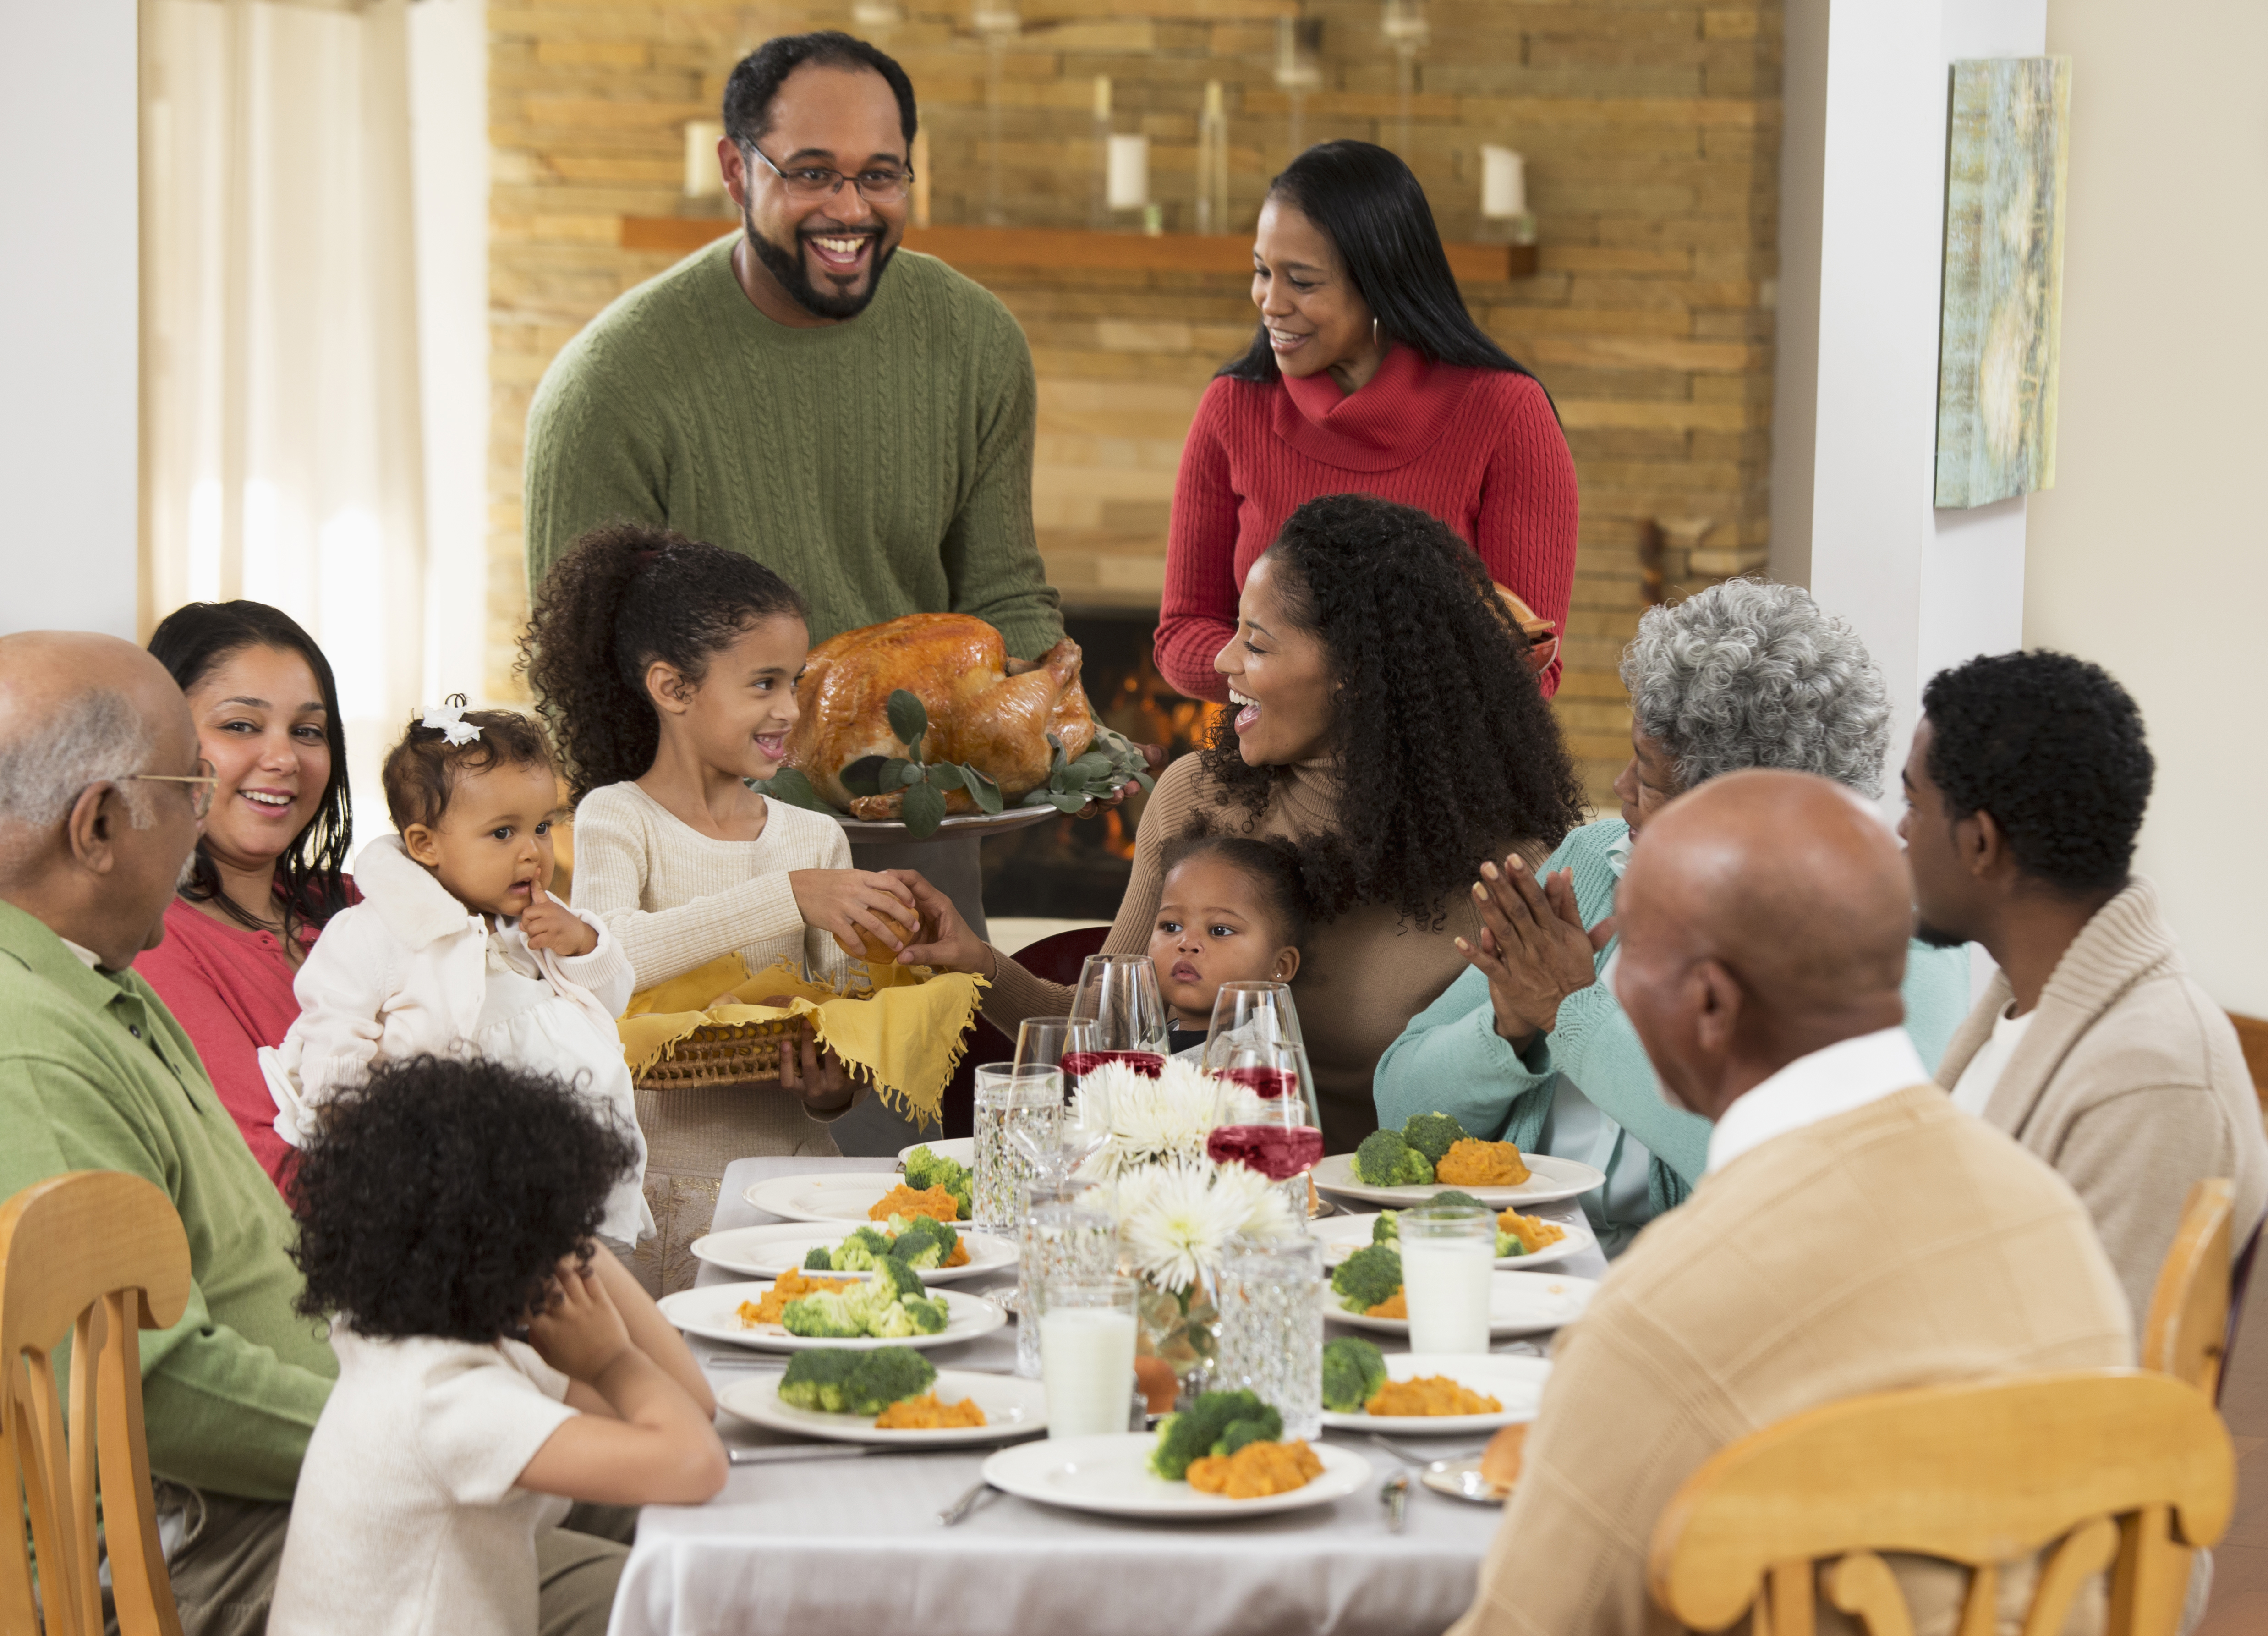 Family eating Thanksgiving dinner | Source: Getty Images